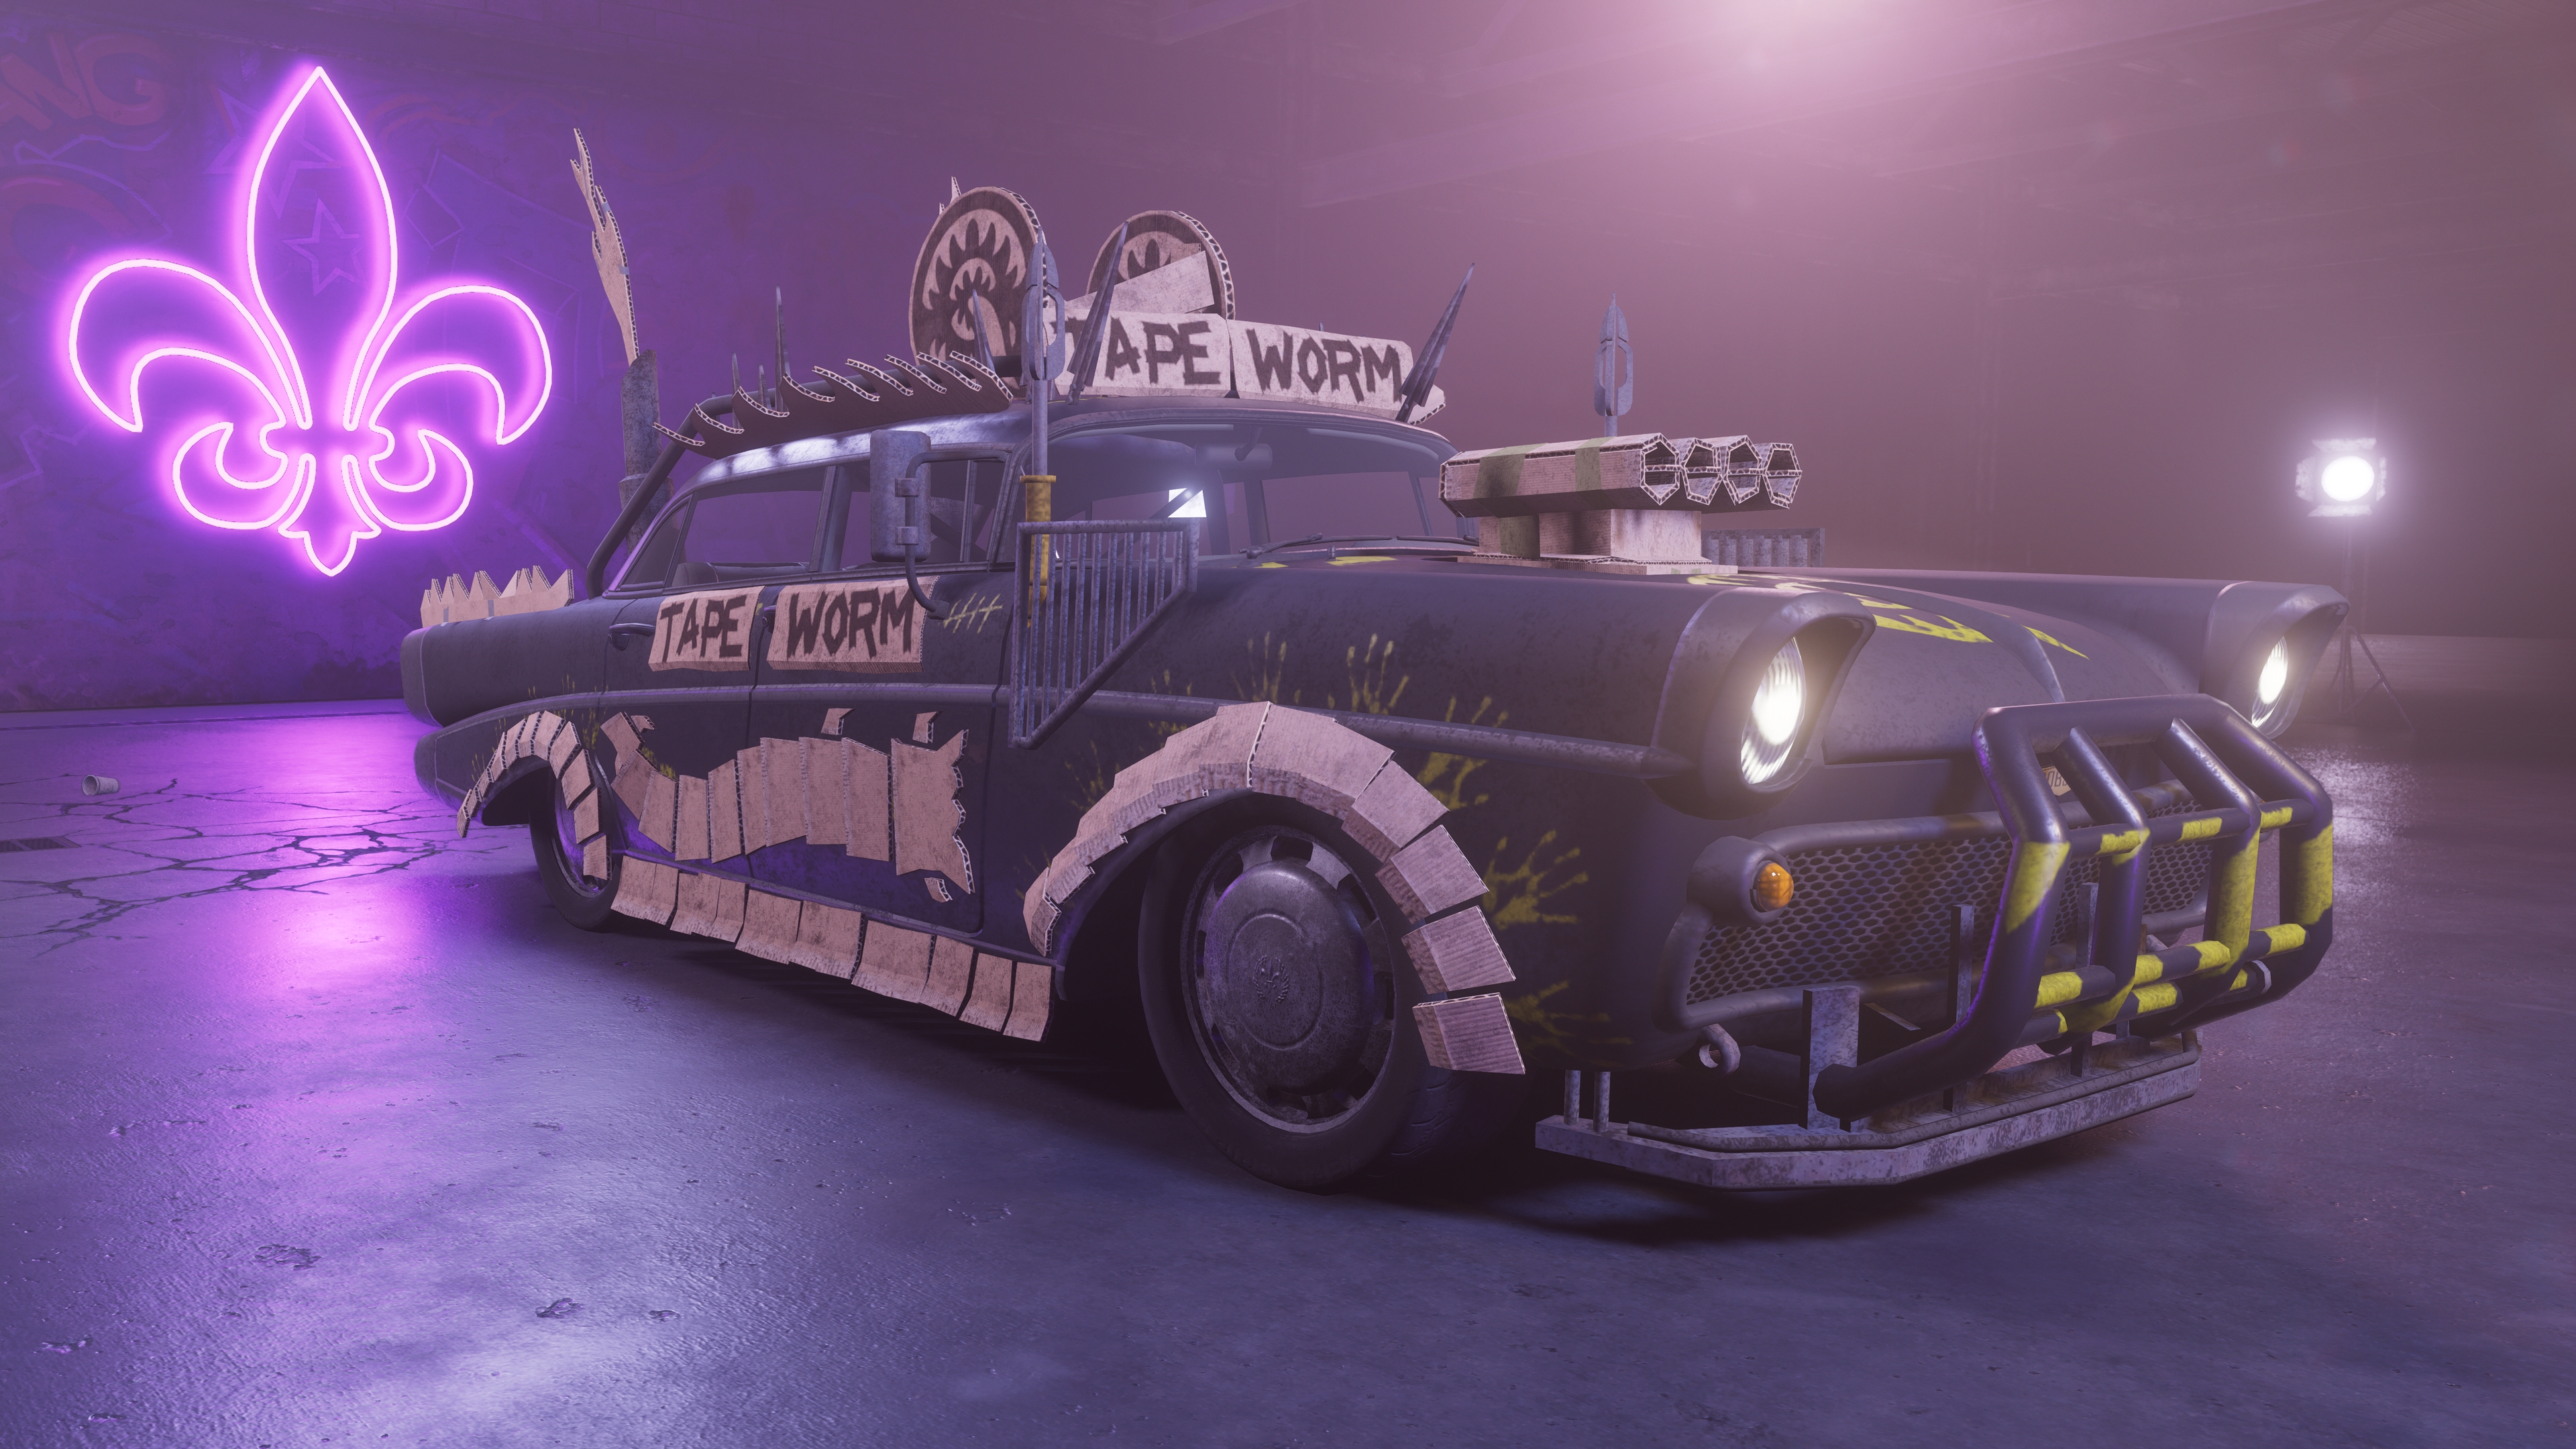 New Saints Row trailer shows extent of the game's customisation options